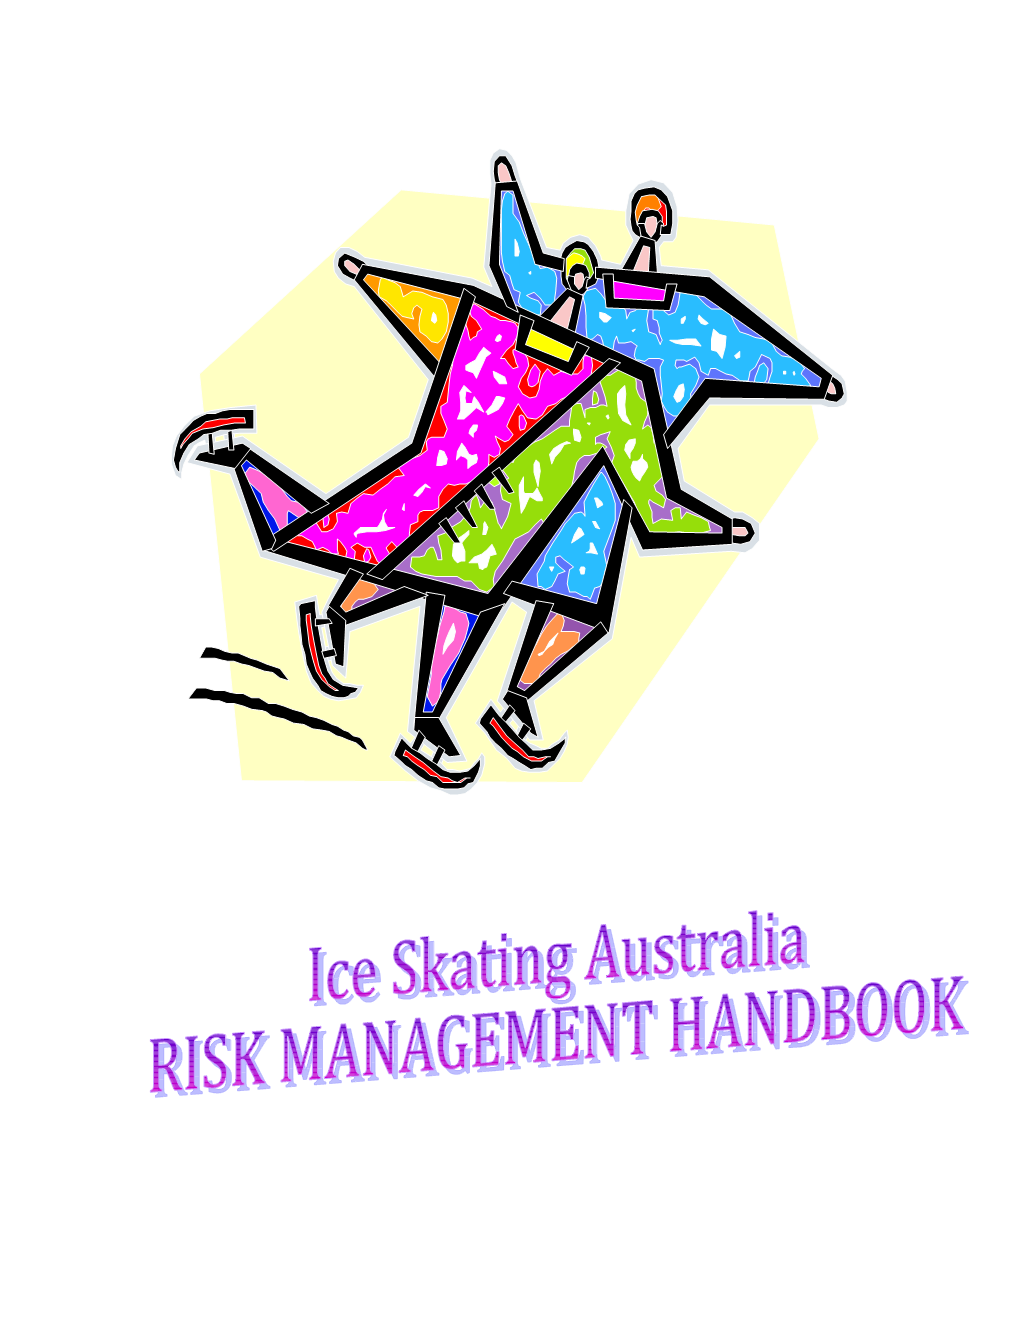 Ice Skating Australia S Risk Management Handbook Contains the Followingfive Sections